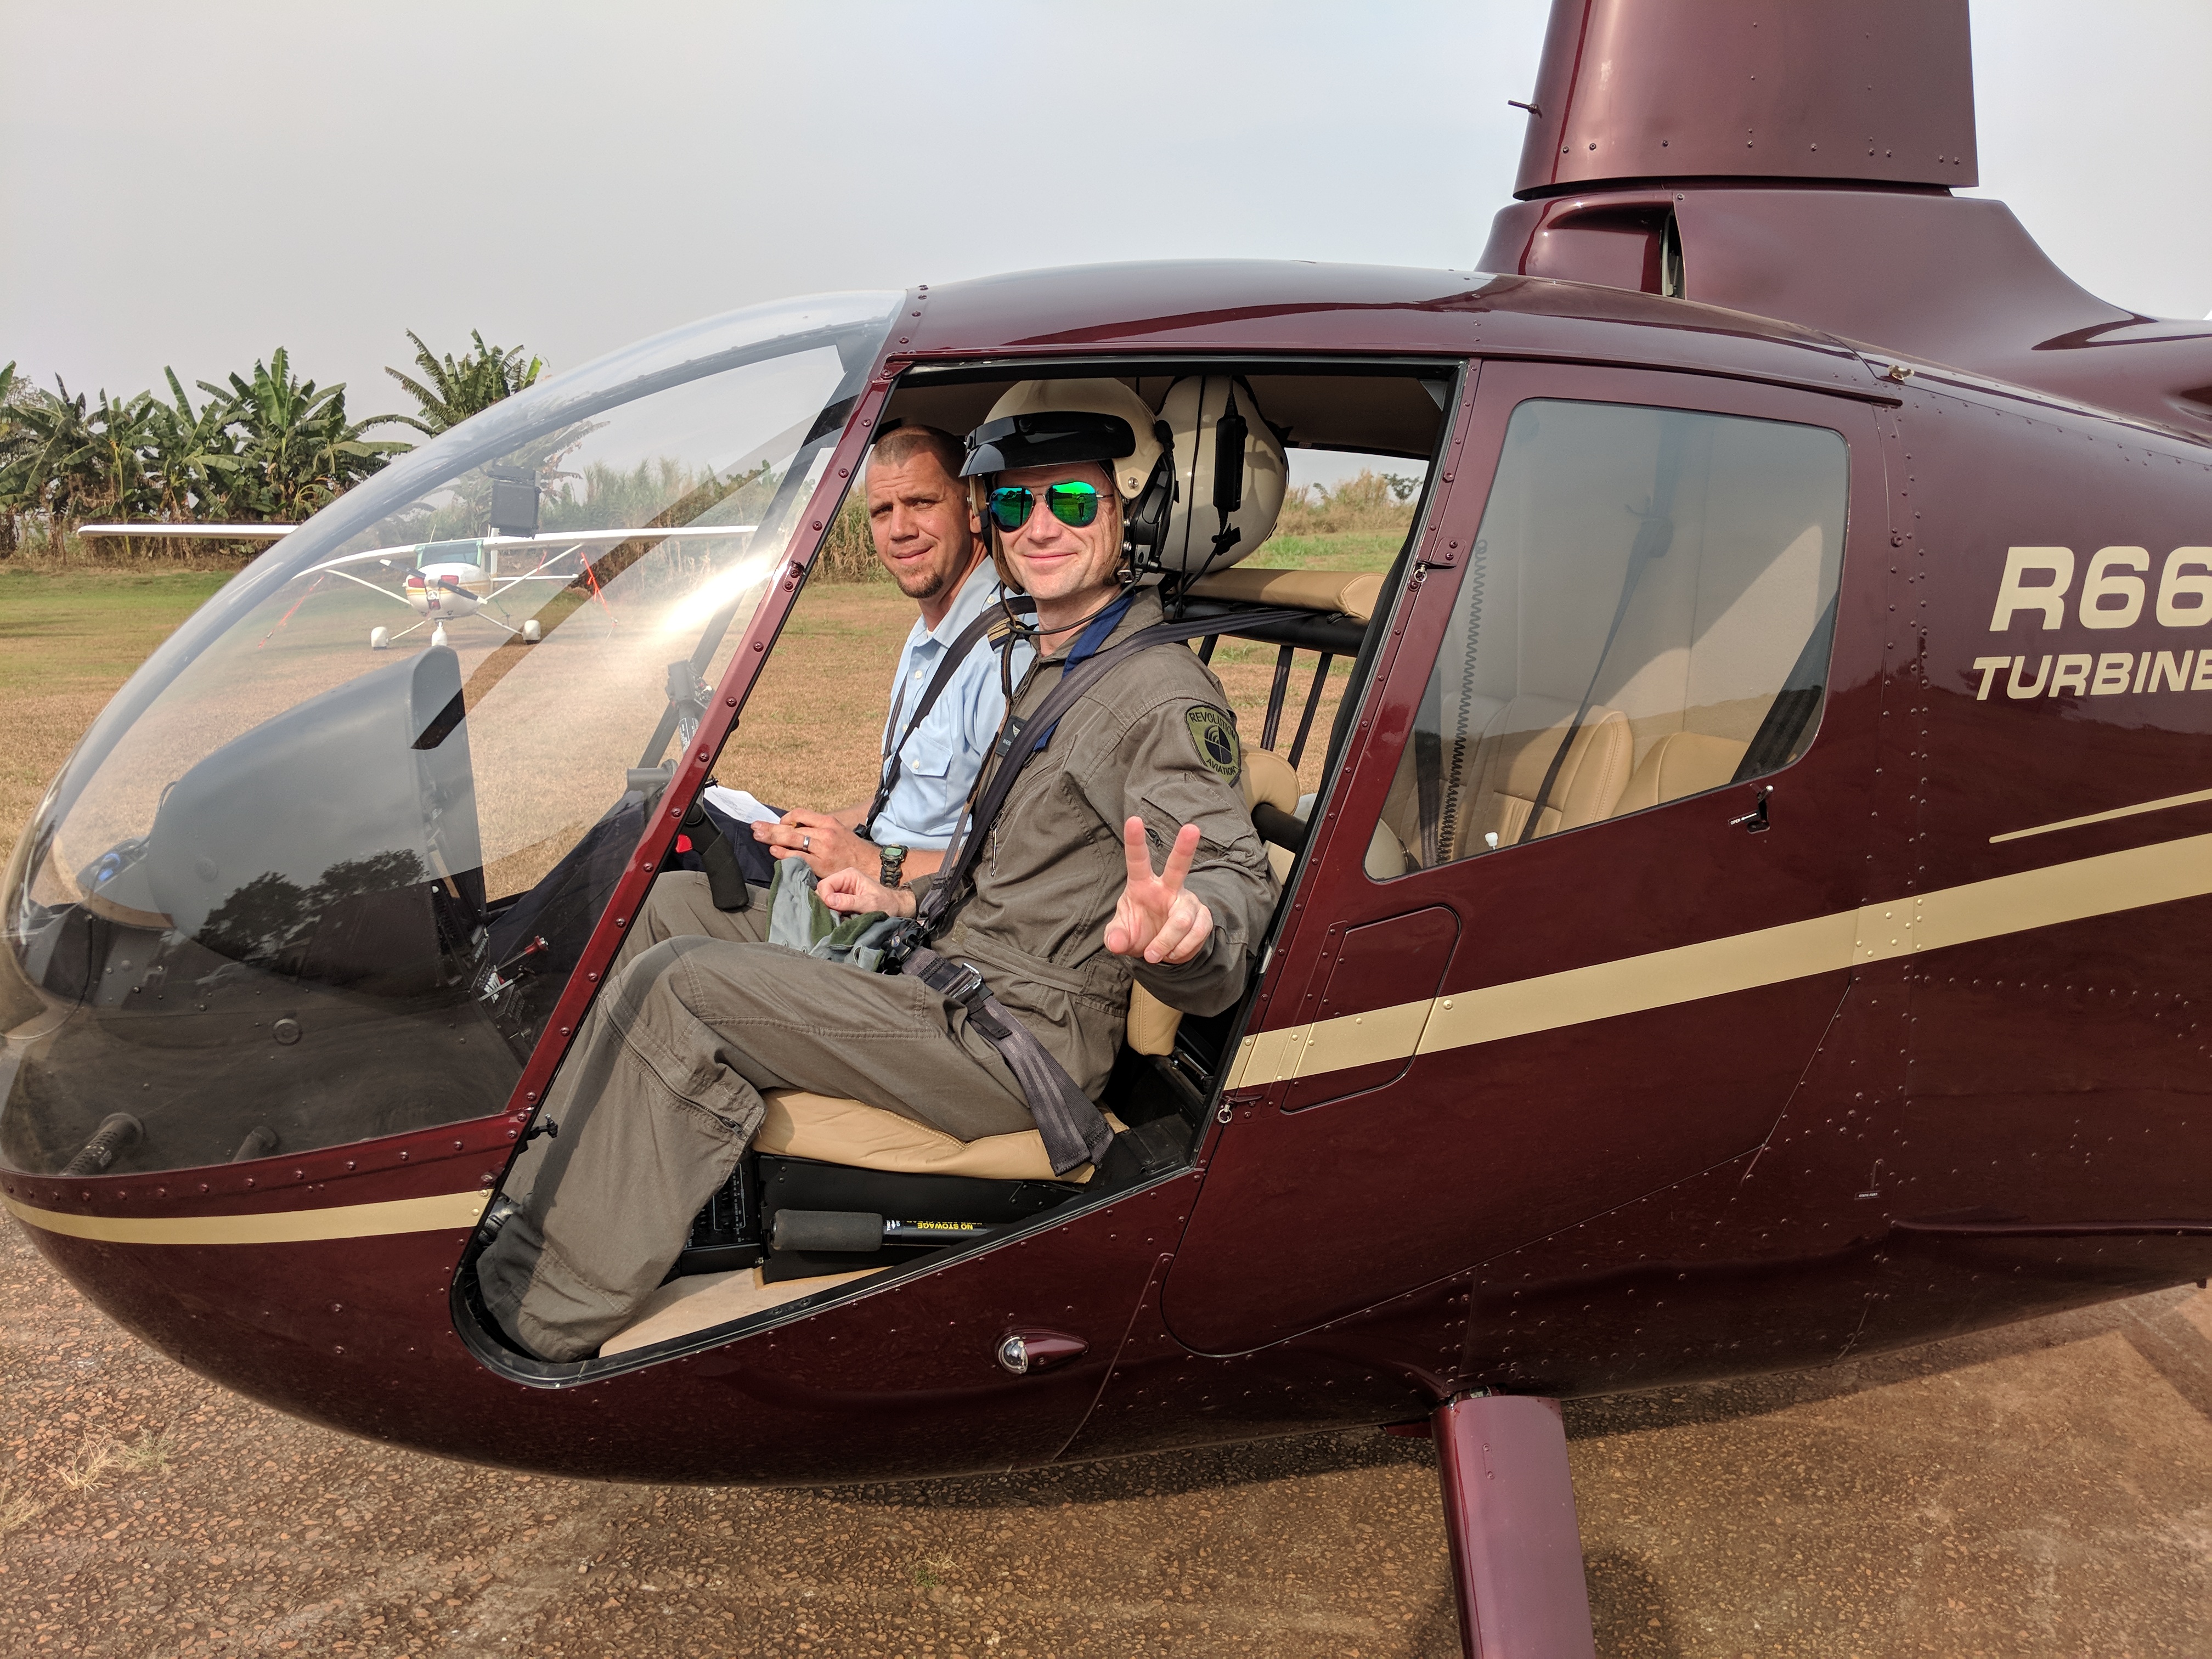 JAARS, a nonprofit organization, has operated an R44 helicopter for several years and recently reviewed its operational requirements and found a need for an R66 turbine helicopter. Revolution Aviation Photo